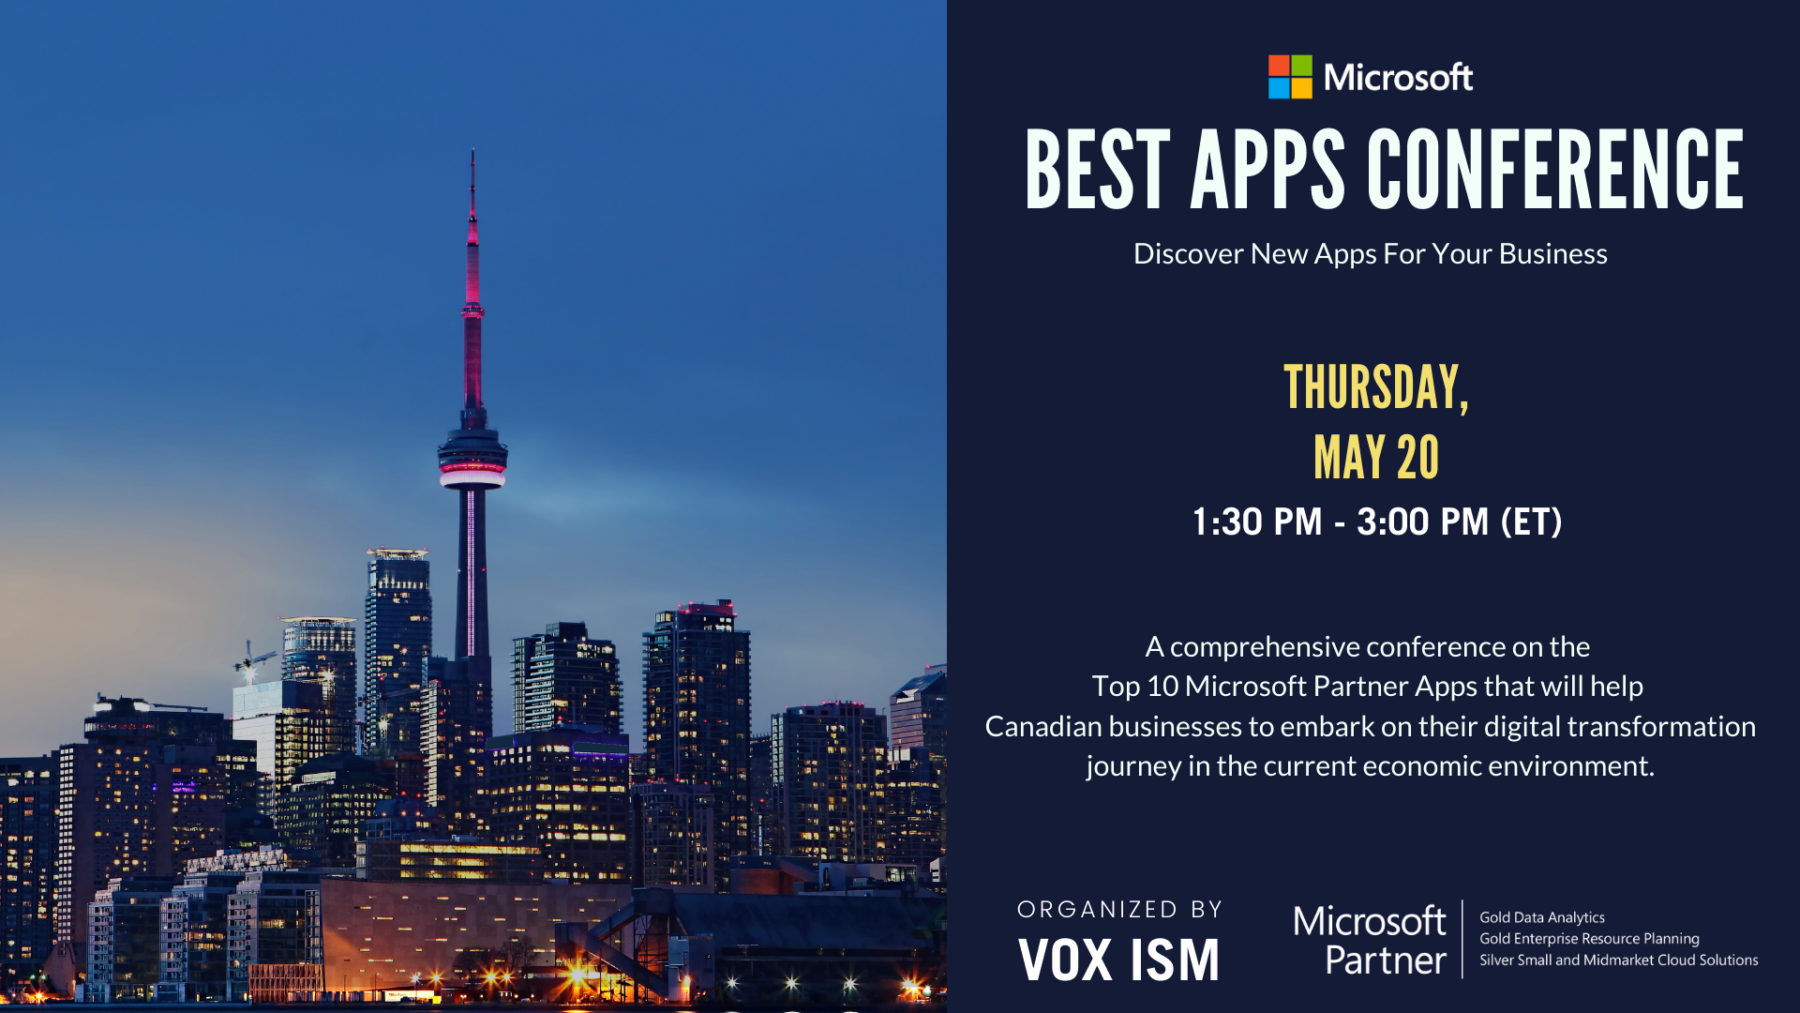 Microsoft Best Apps Conference - VOX ISM